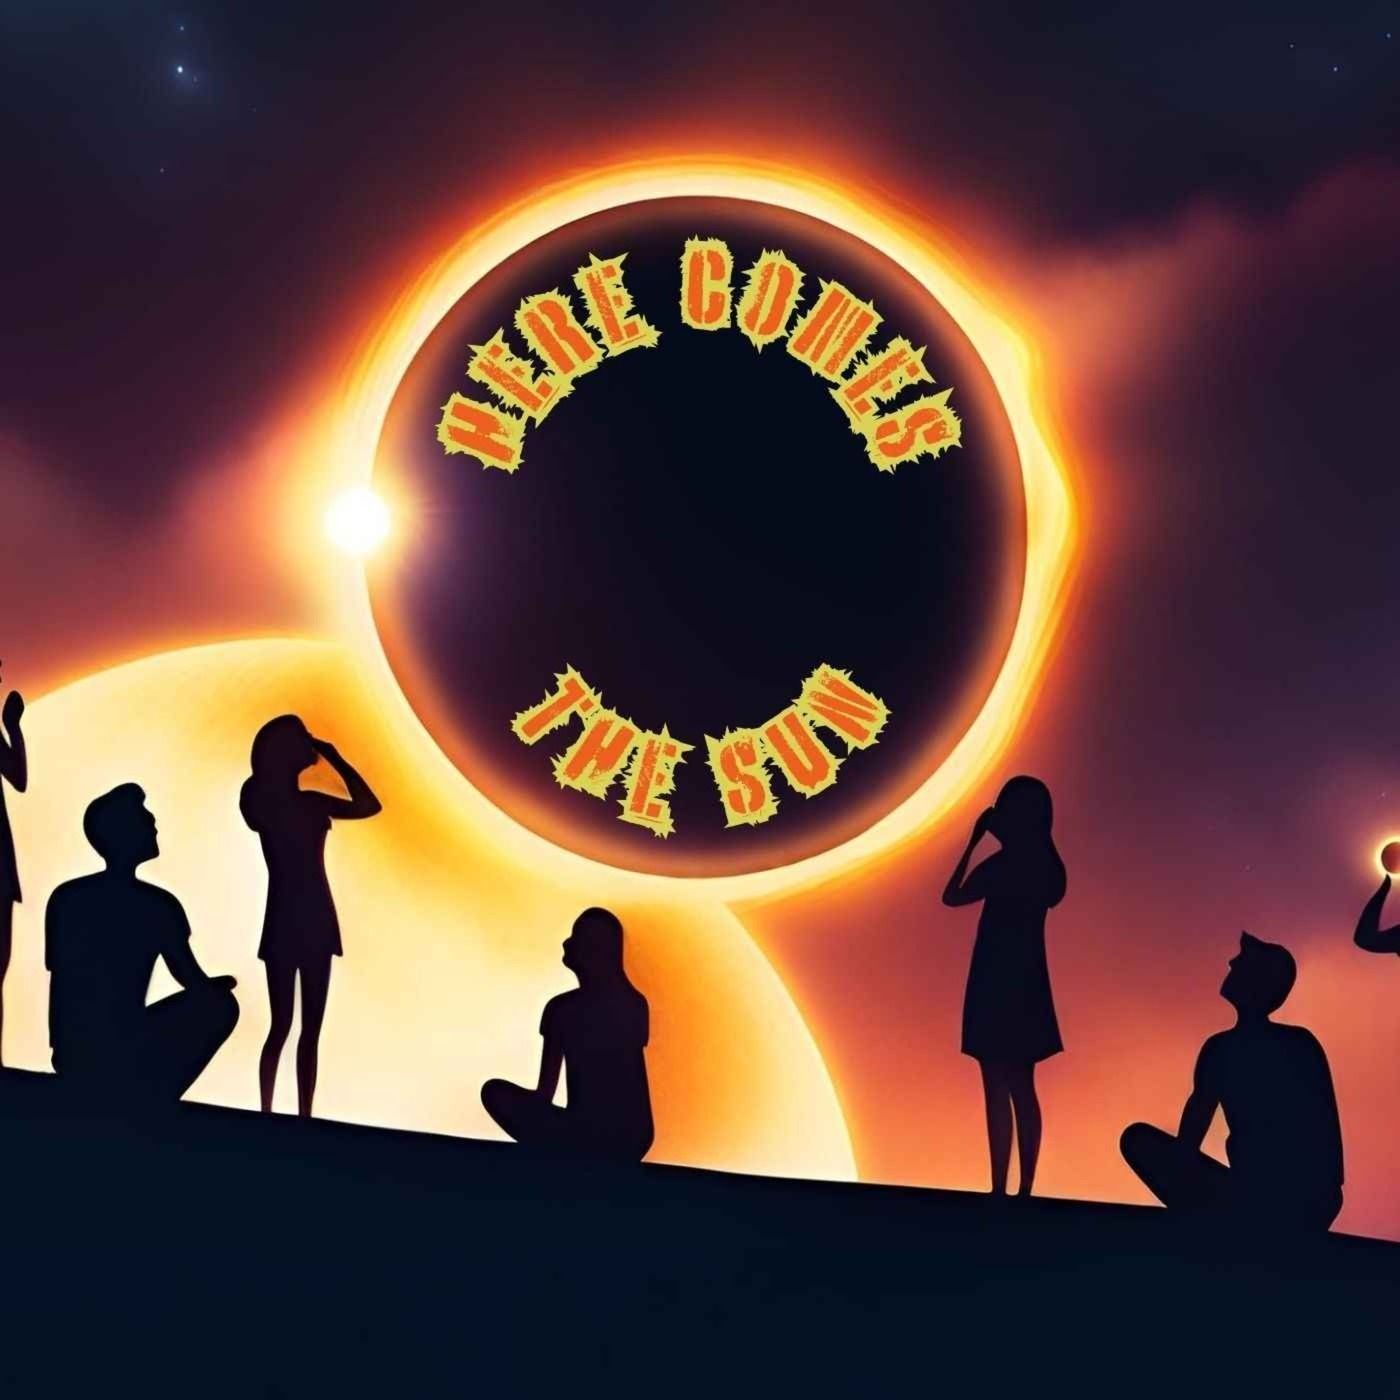 Ep. #625: HERE COMES THE SUN w/ 